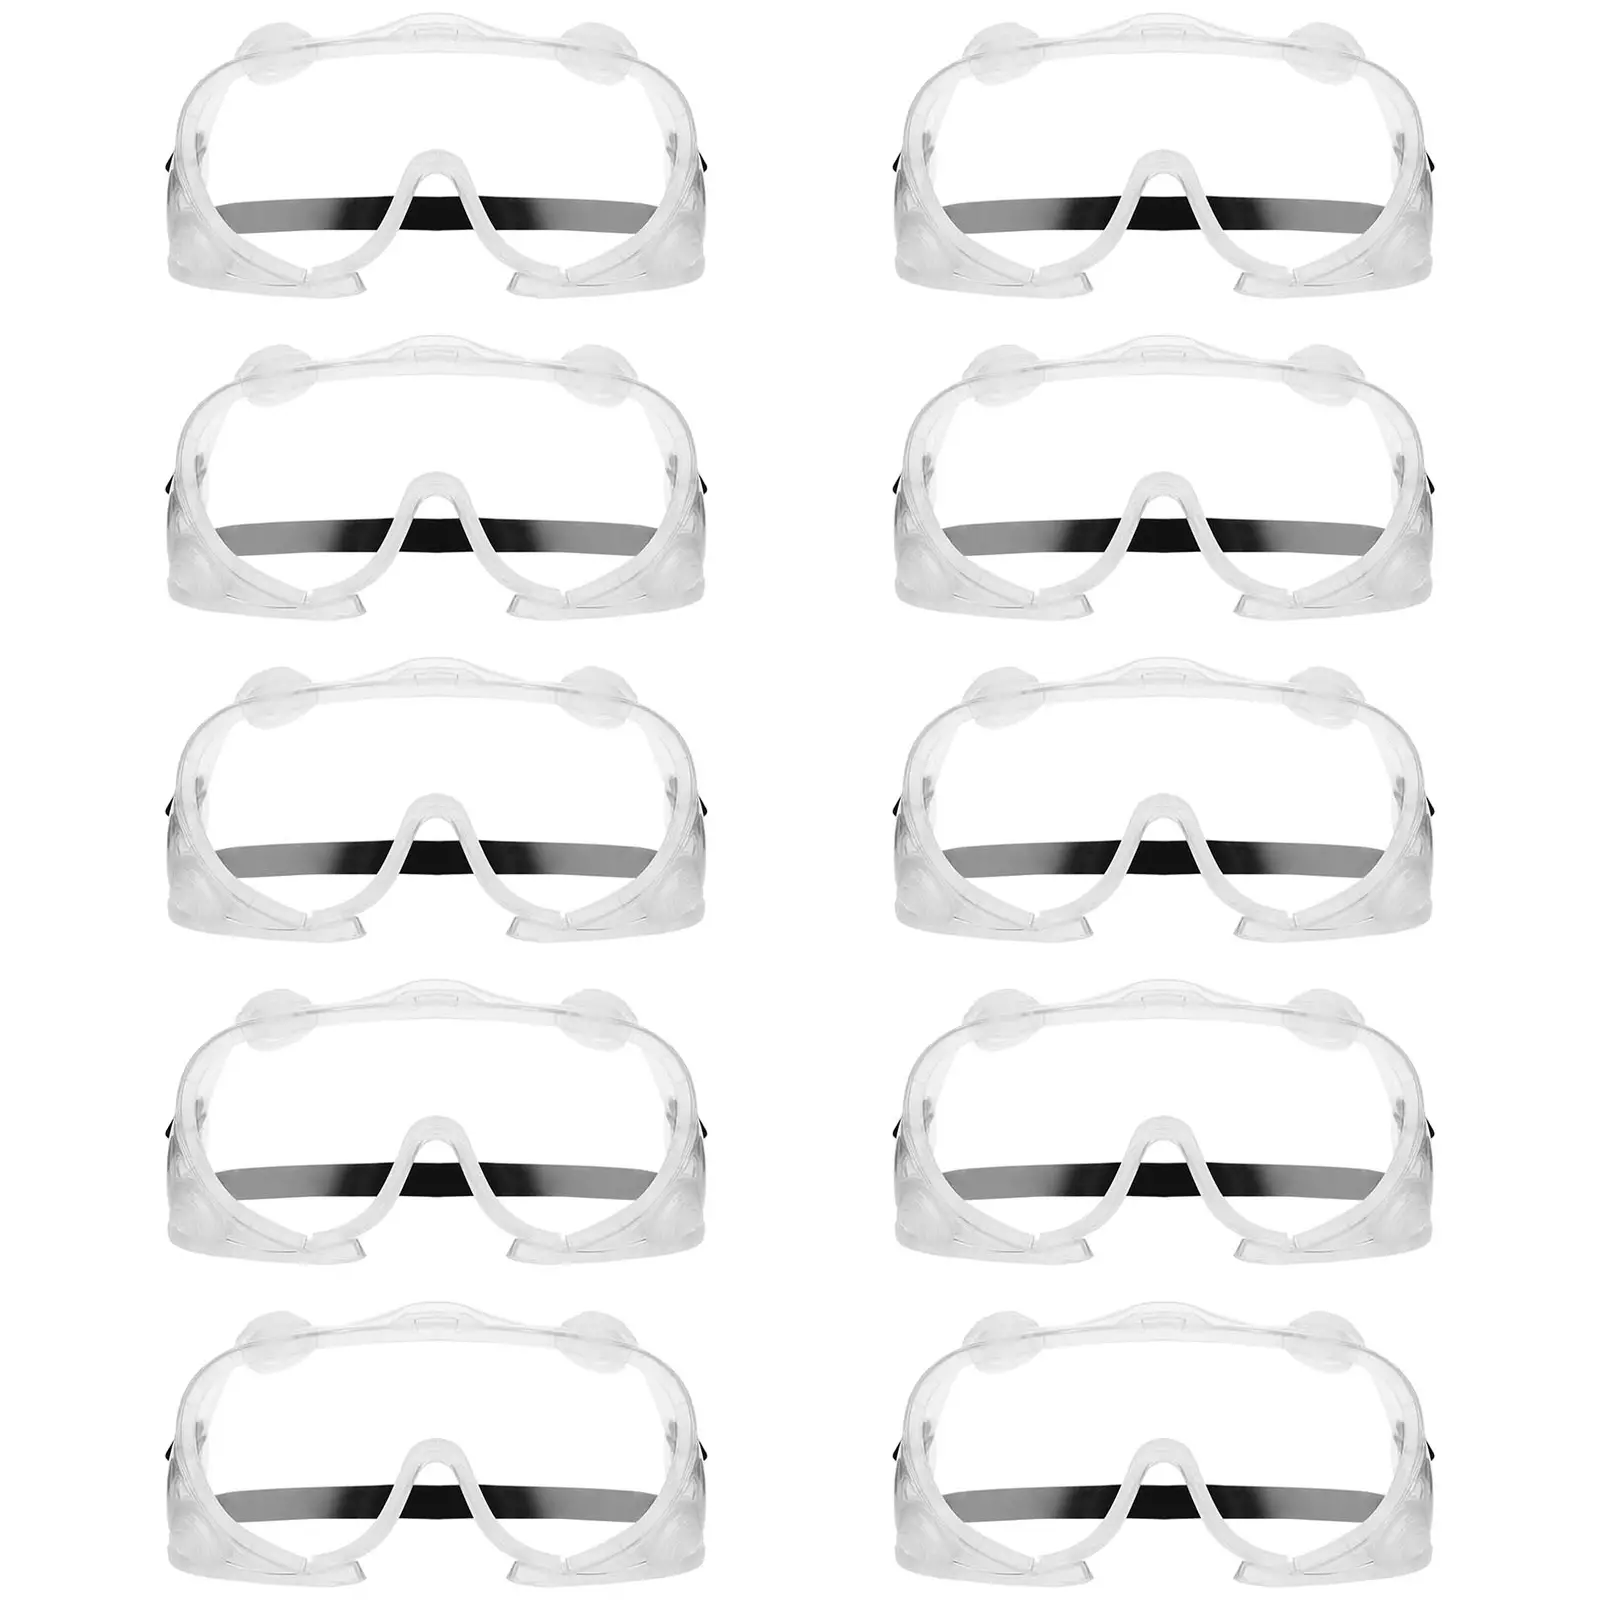 Safety Glasses - set of 10 - clear - one size